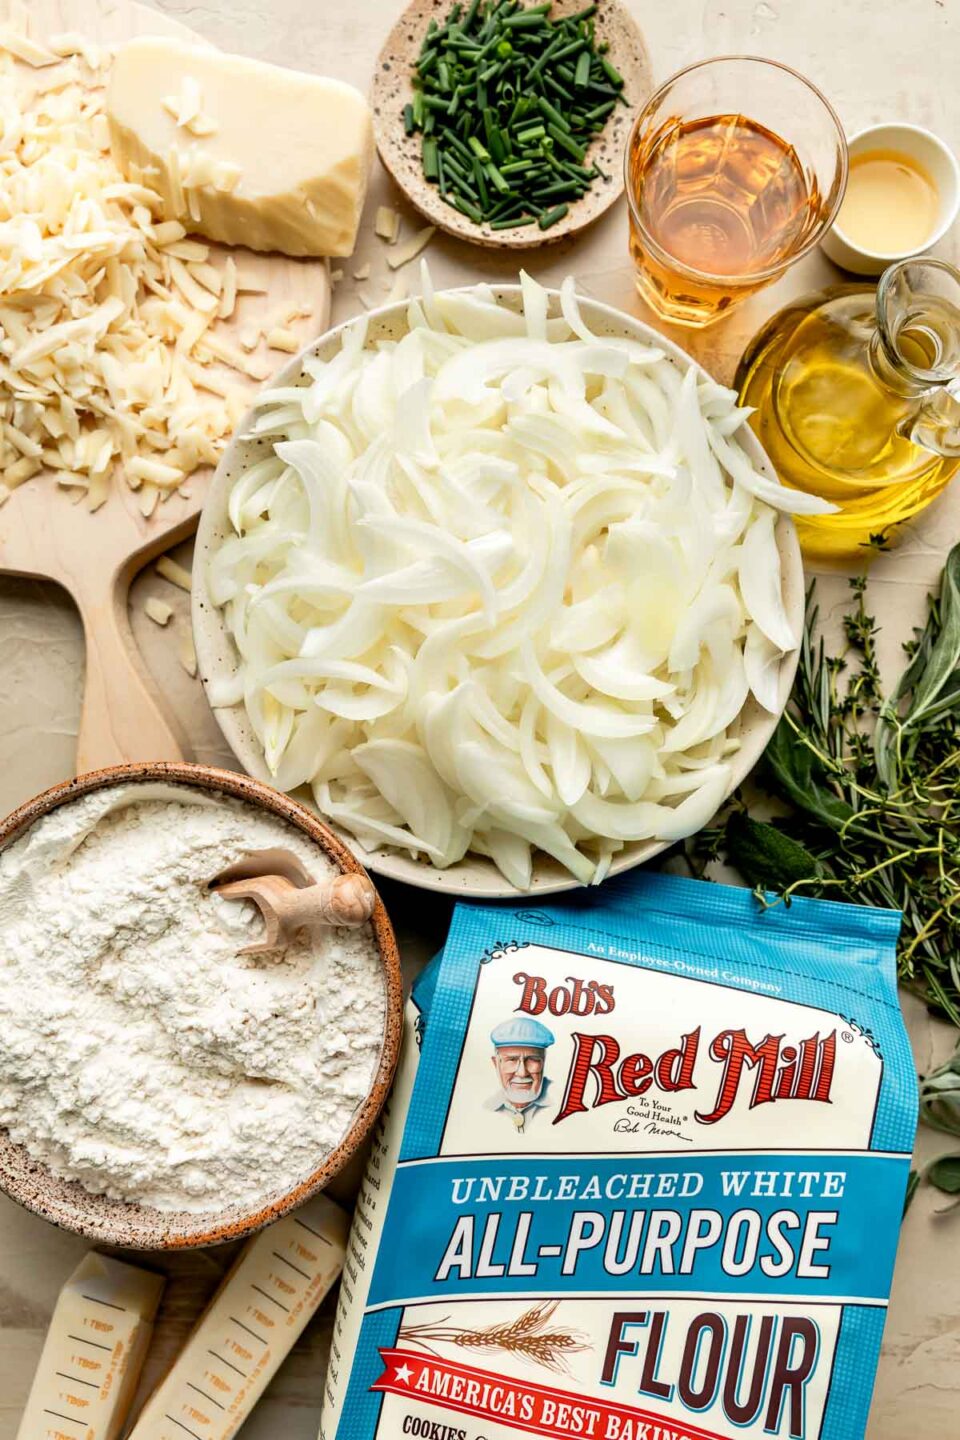 An overhead shot of ingredients displayed in bowls and on a wooden board atop a beige surface: an unopened bag of Bob's Red Mill flour, a bowl of flour, sliced onions, gruyere cheese, chives, fresh herbs, butter, olive oil, sherry, and apple cider vinegar.